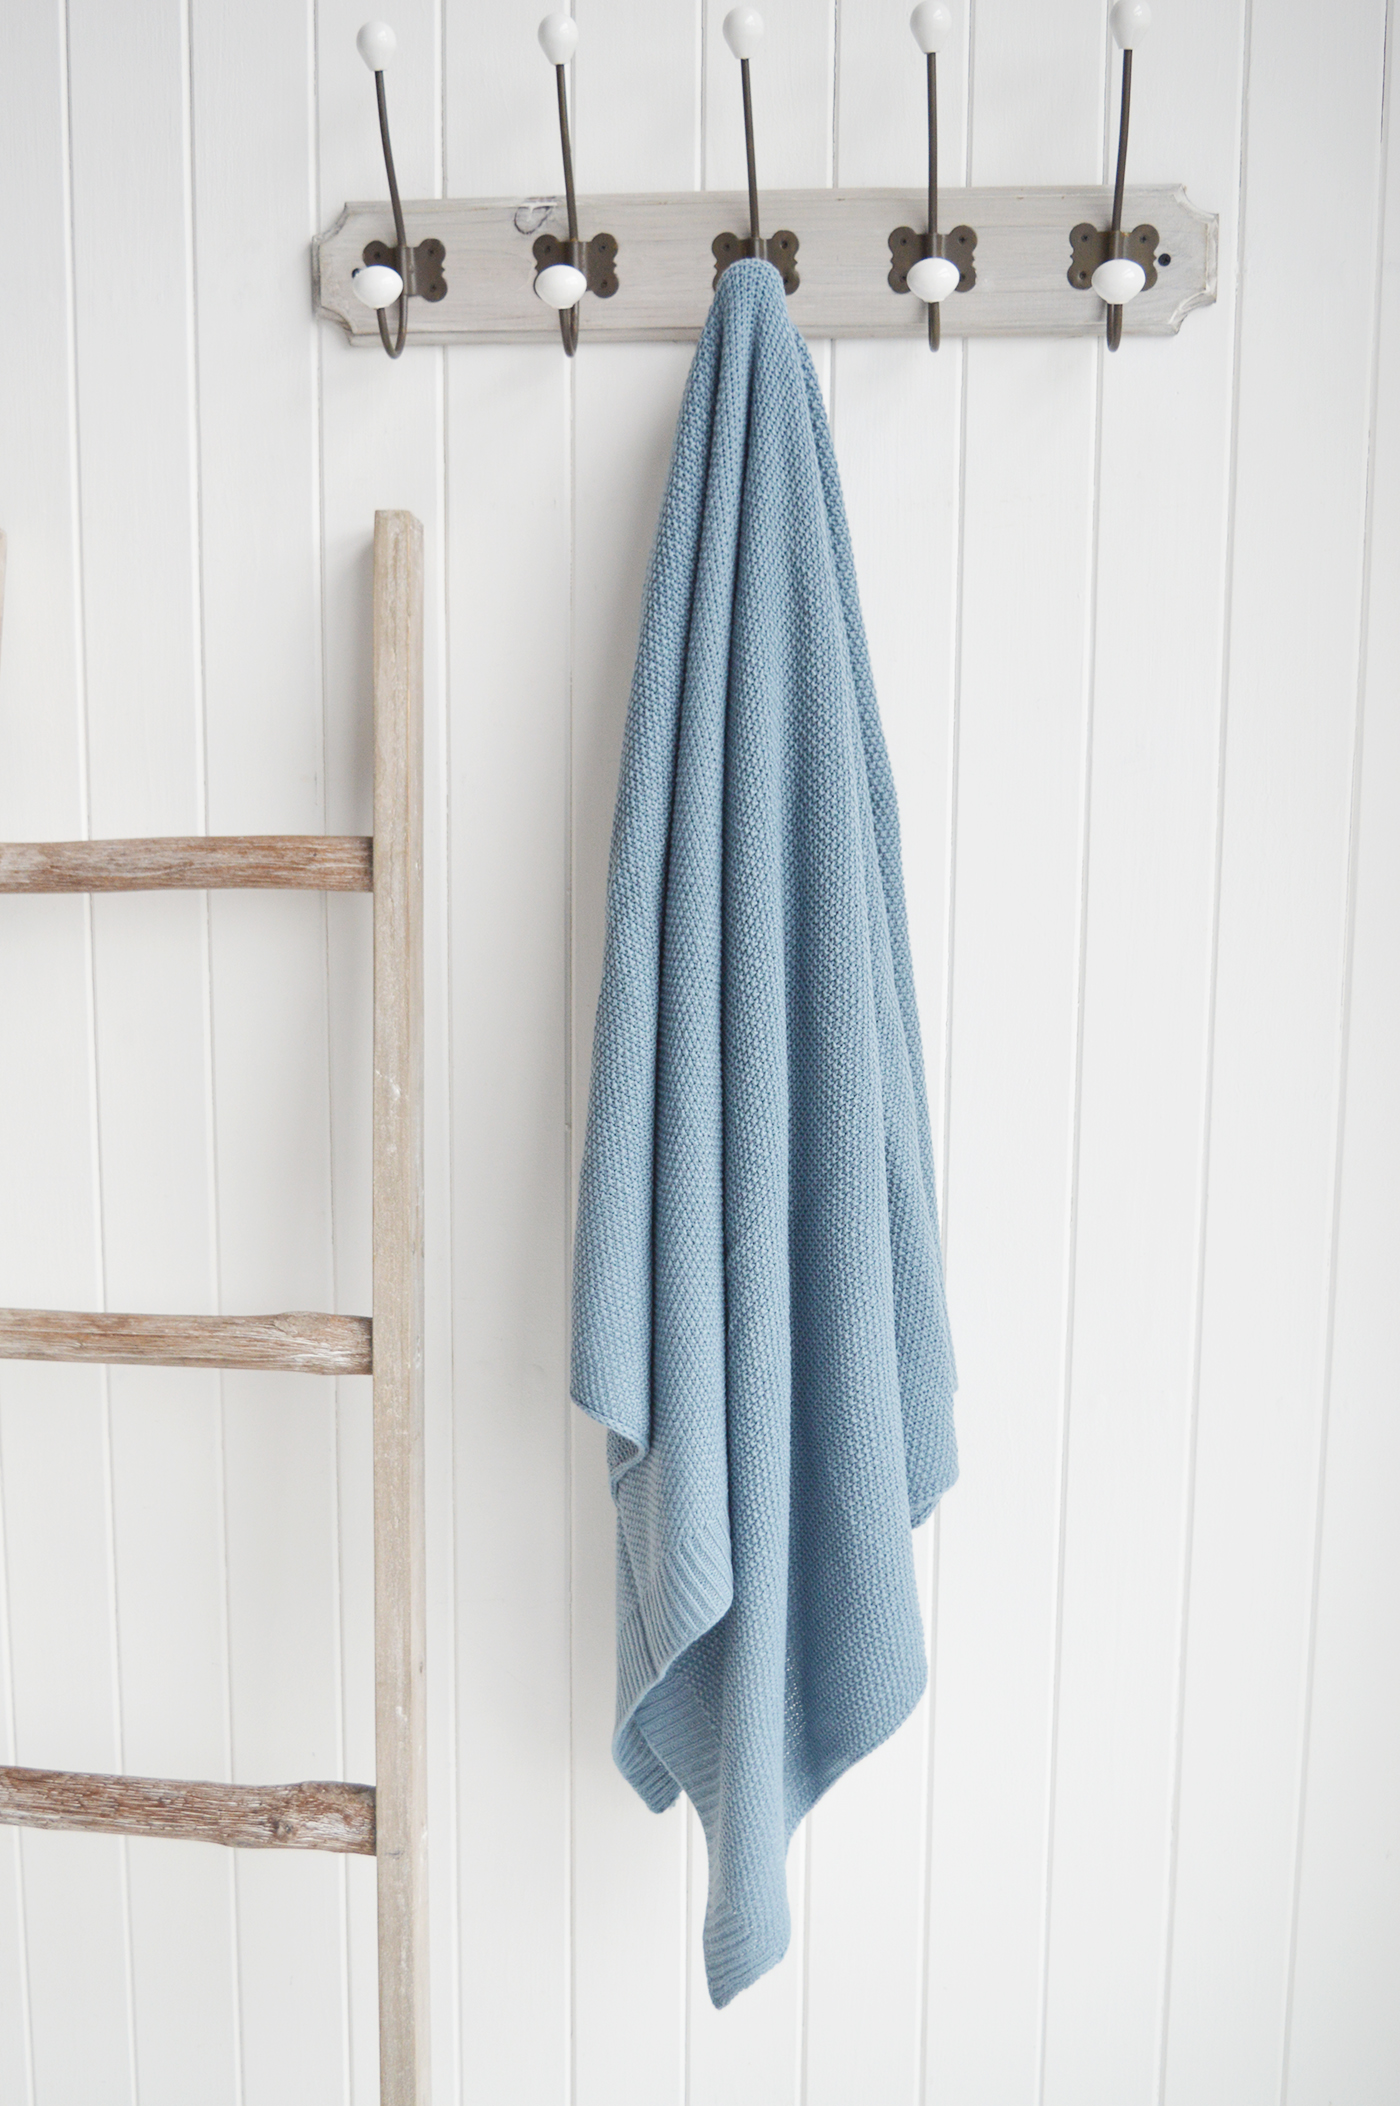 New England Style White Furniture and accessories for the home. Coastal, country and modern farmhouse interiors and furniture. Harrington Blue Knotted Throw throw and blankets